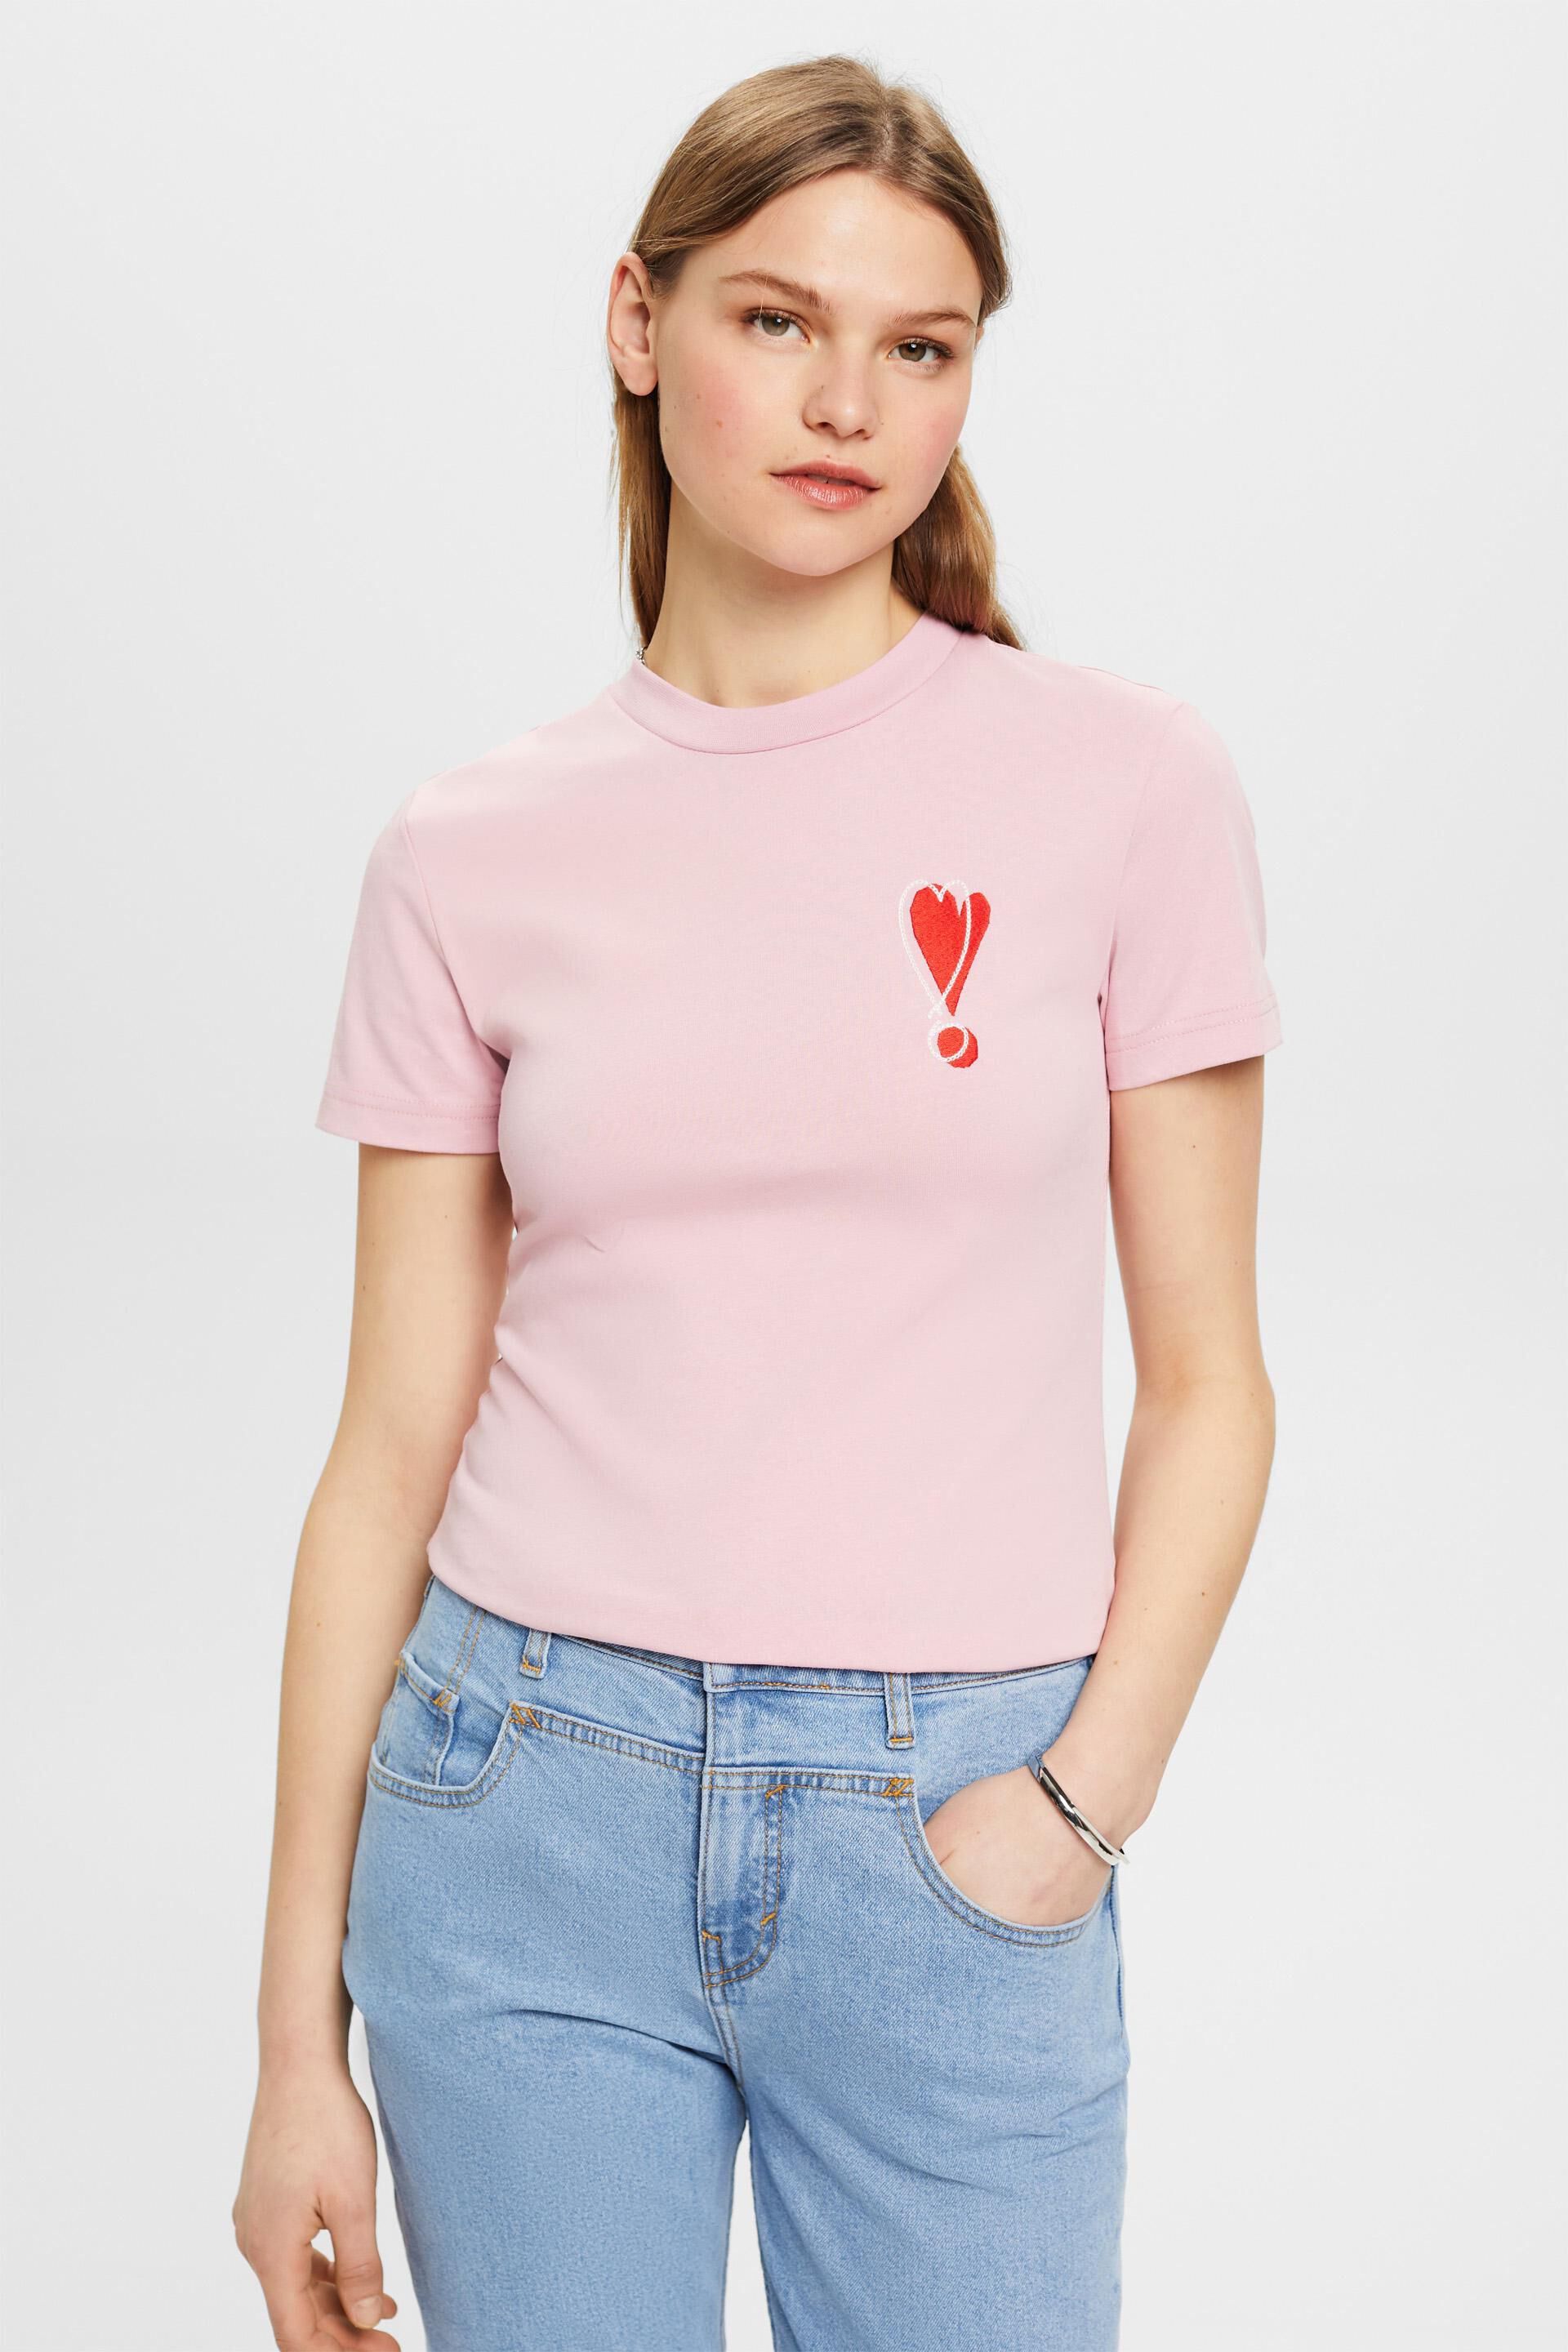 Esprit Cotton T-shirt motif heart embroidered with